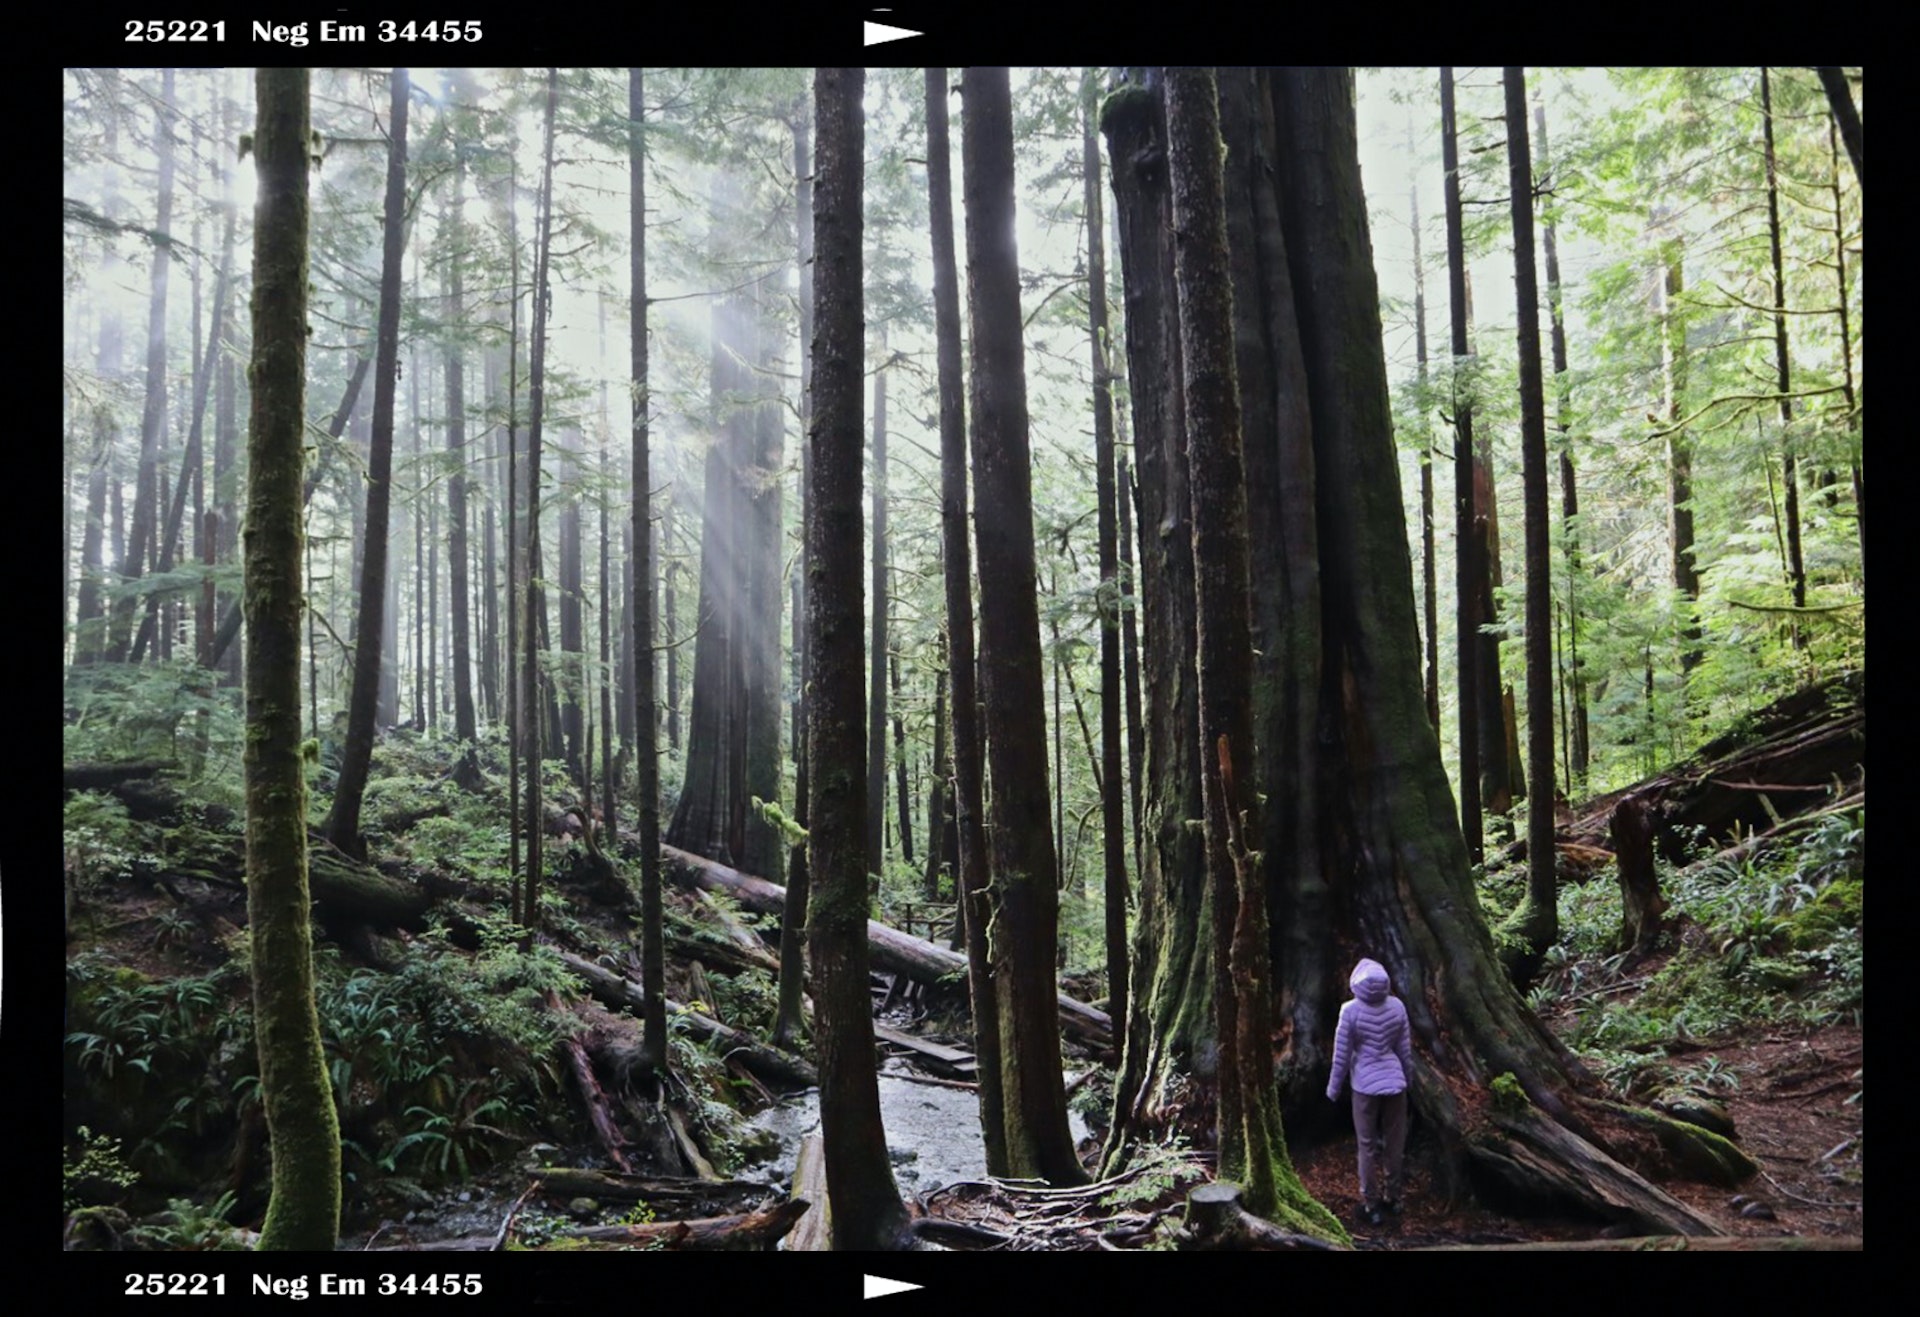 Hiking through a forest of Douglas firs in Vancouver Island